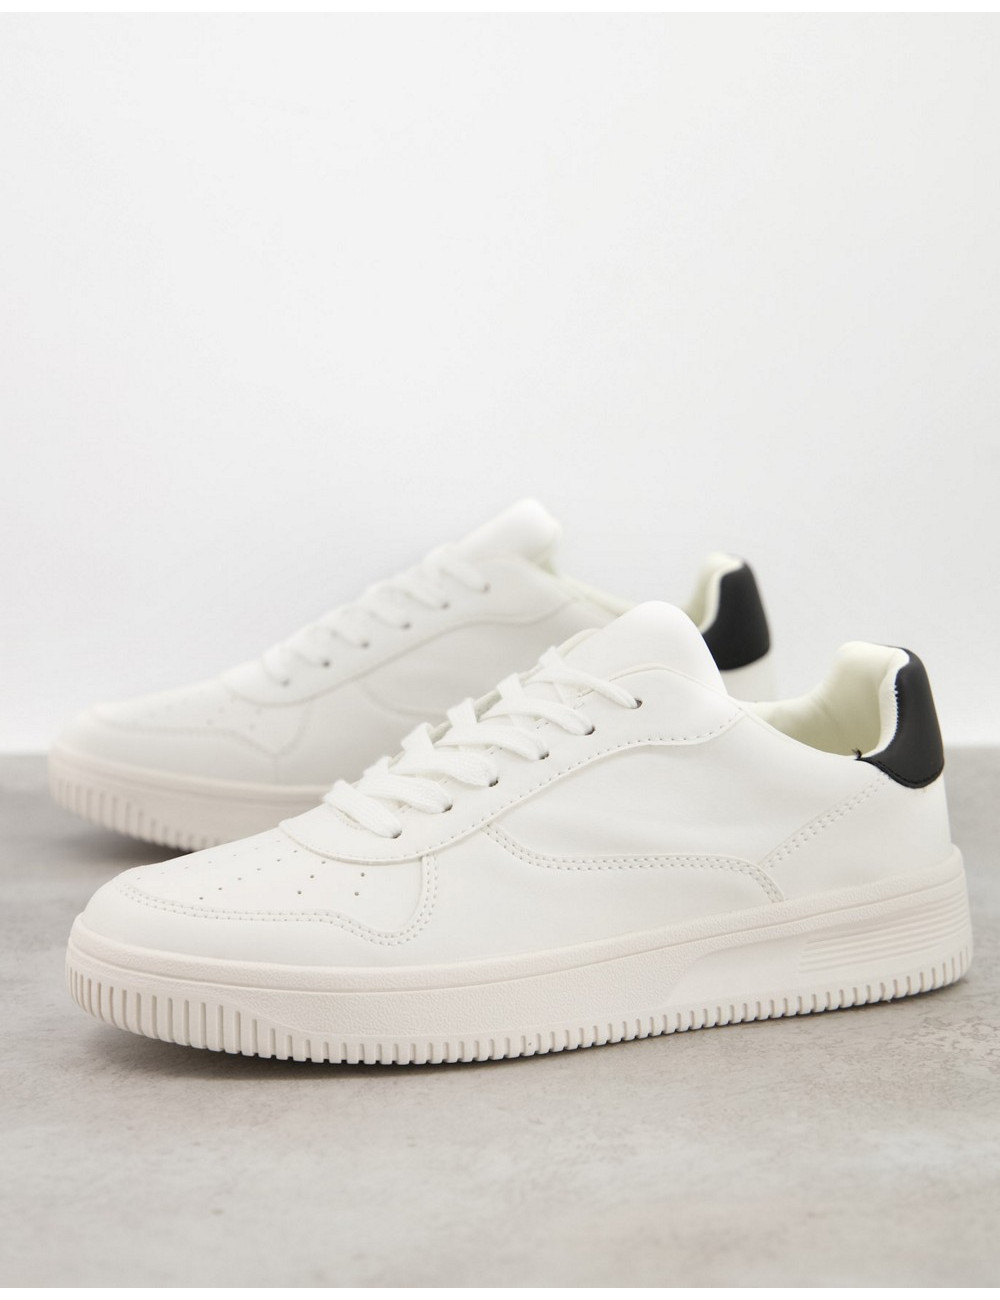 New Look trainer in white